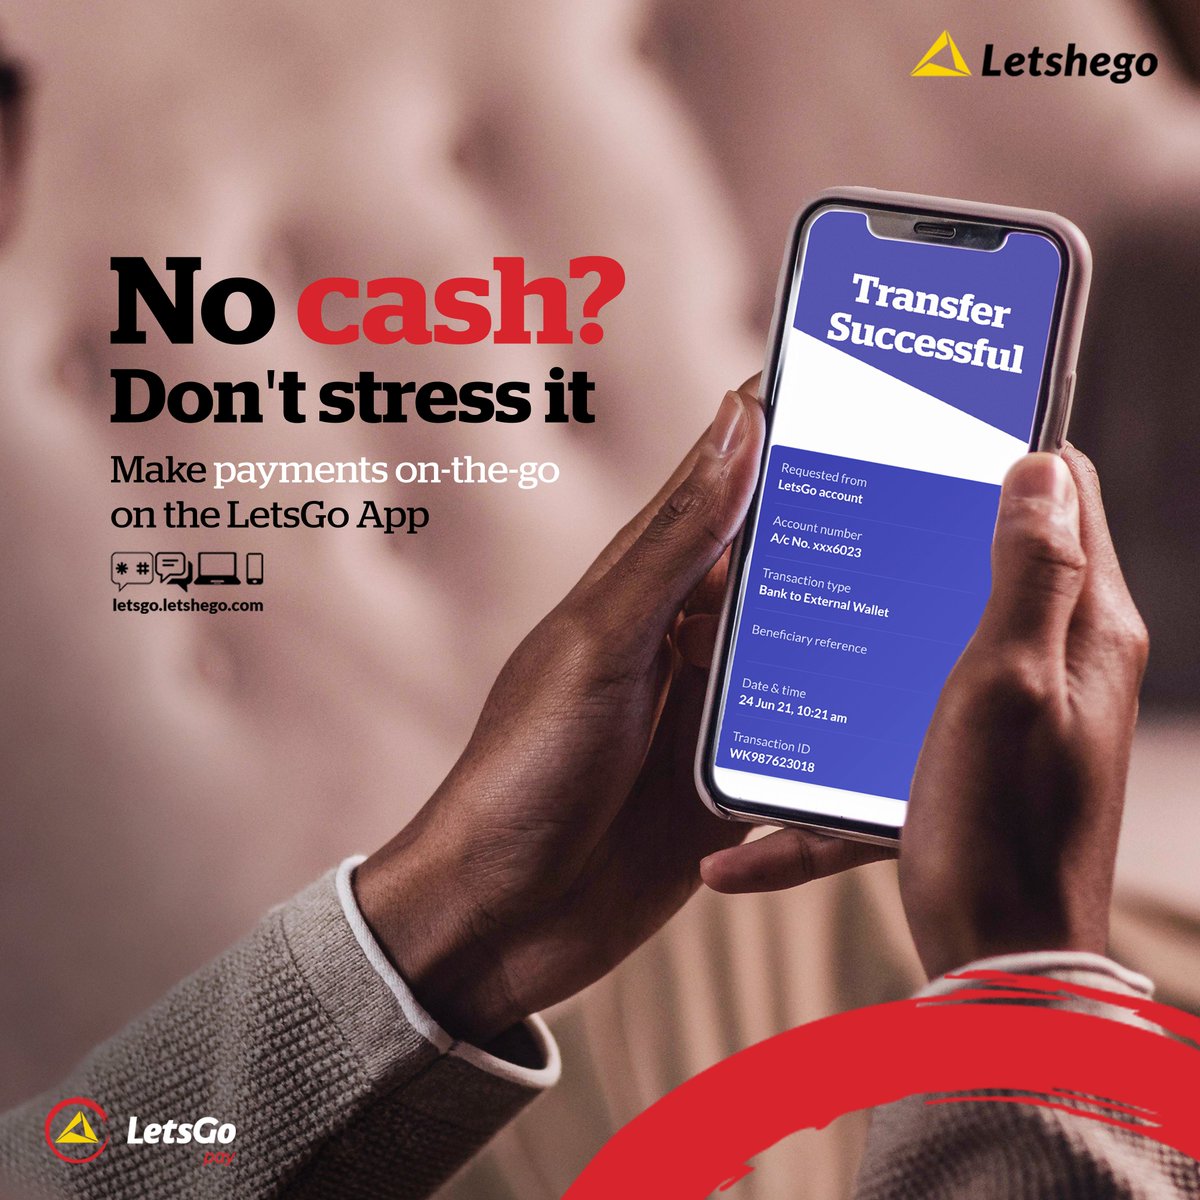 Make payments anywhere, anytime with the LetsGo App.

Join the easy life today, and download the LetsGo App.

#easypayment #transfer #LetsGoMall